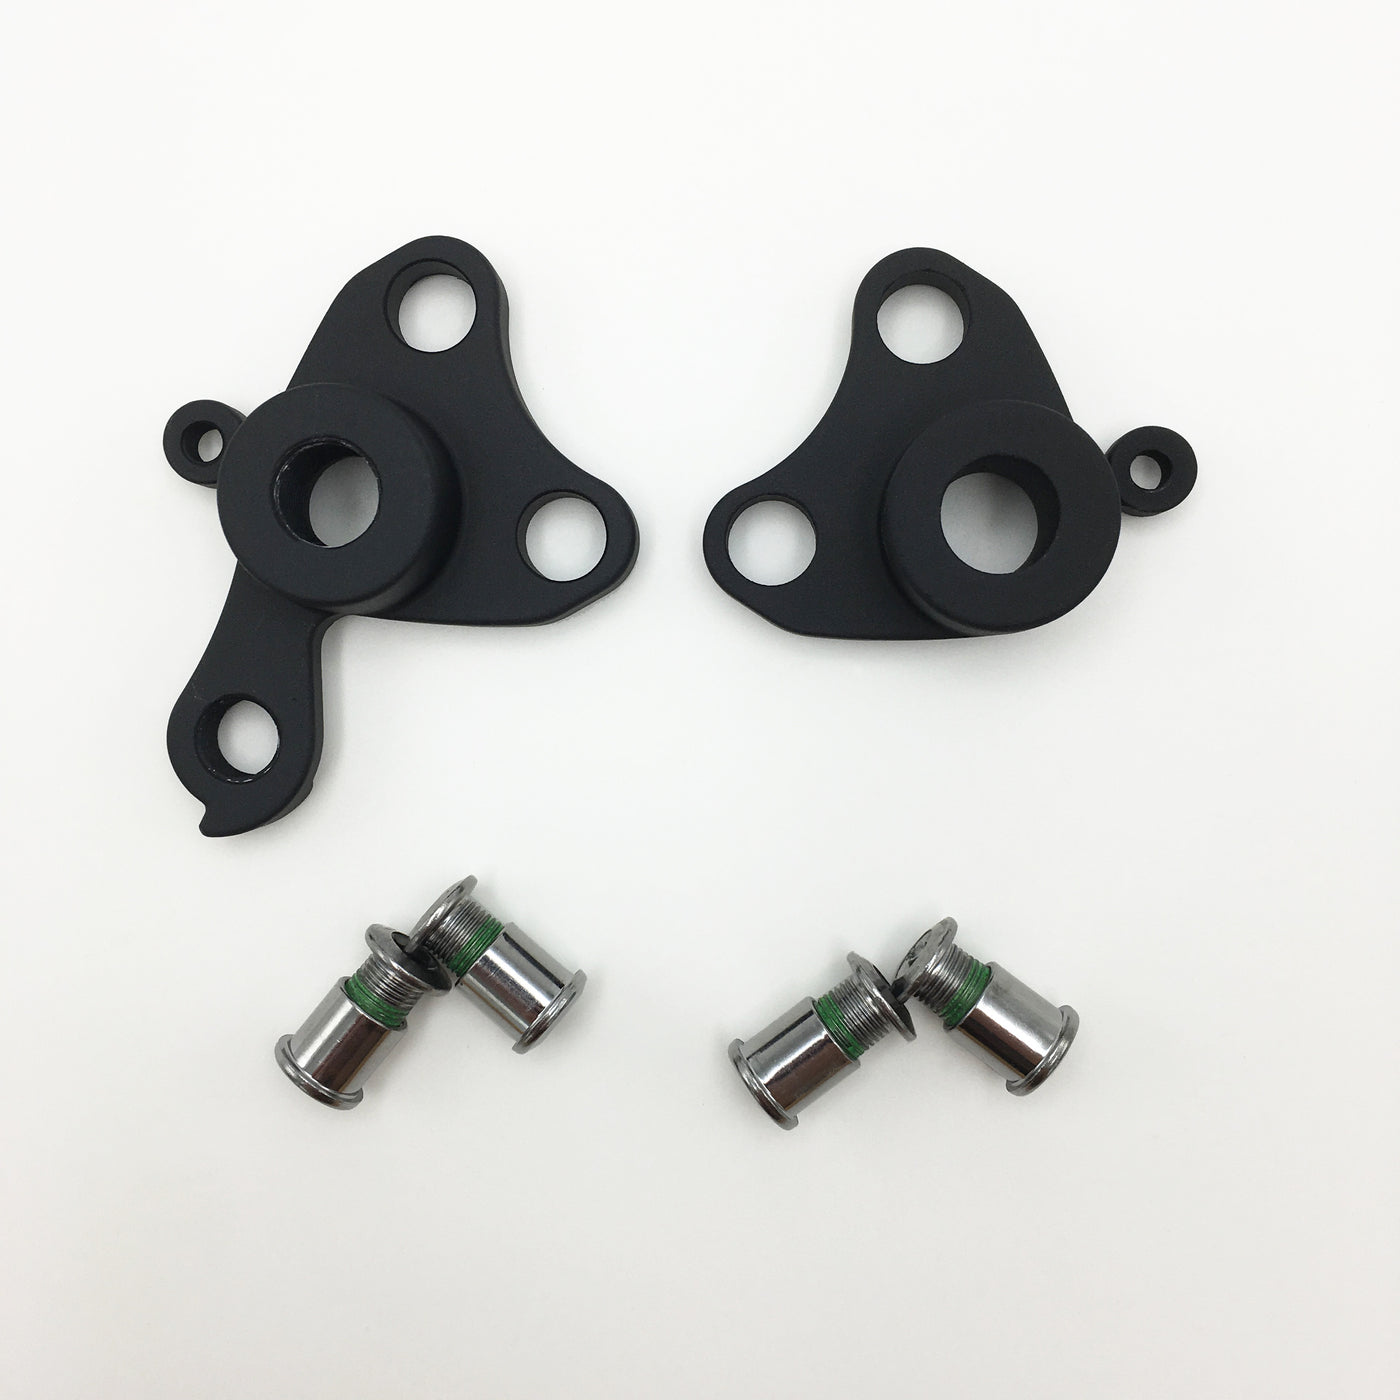 Thru-axle modular dropouts only - with eyelets - 142/12 - 1.5 thread pitch